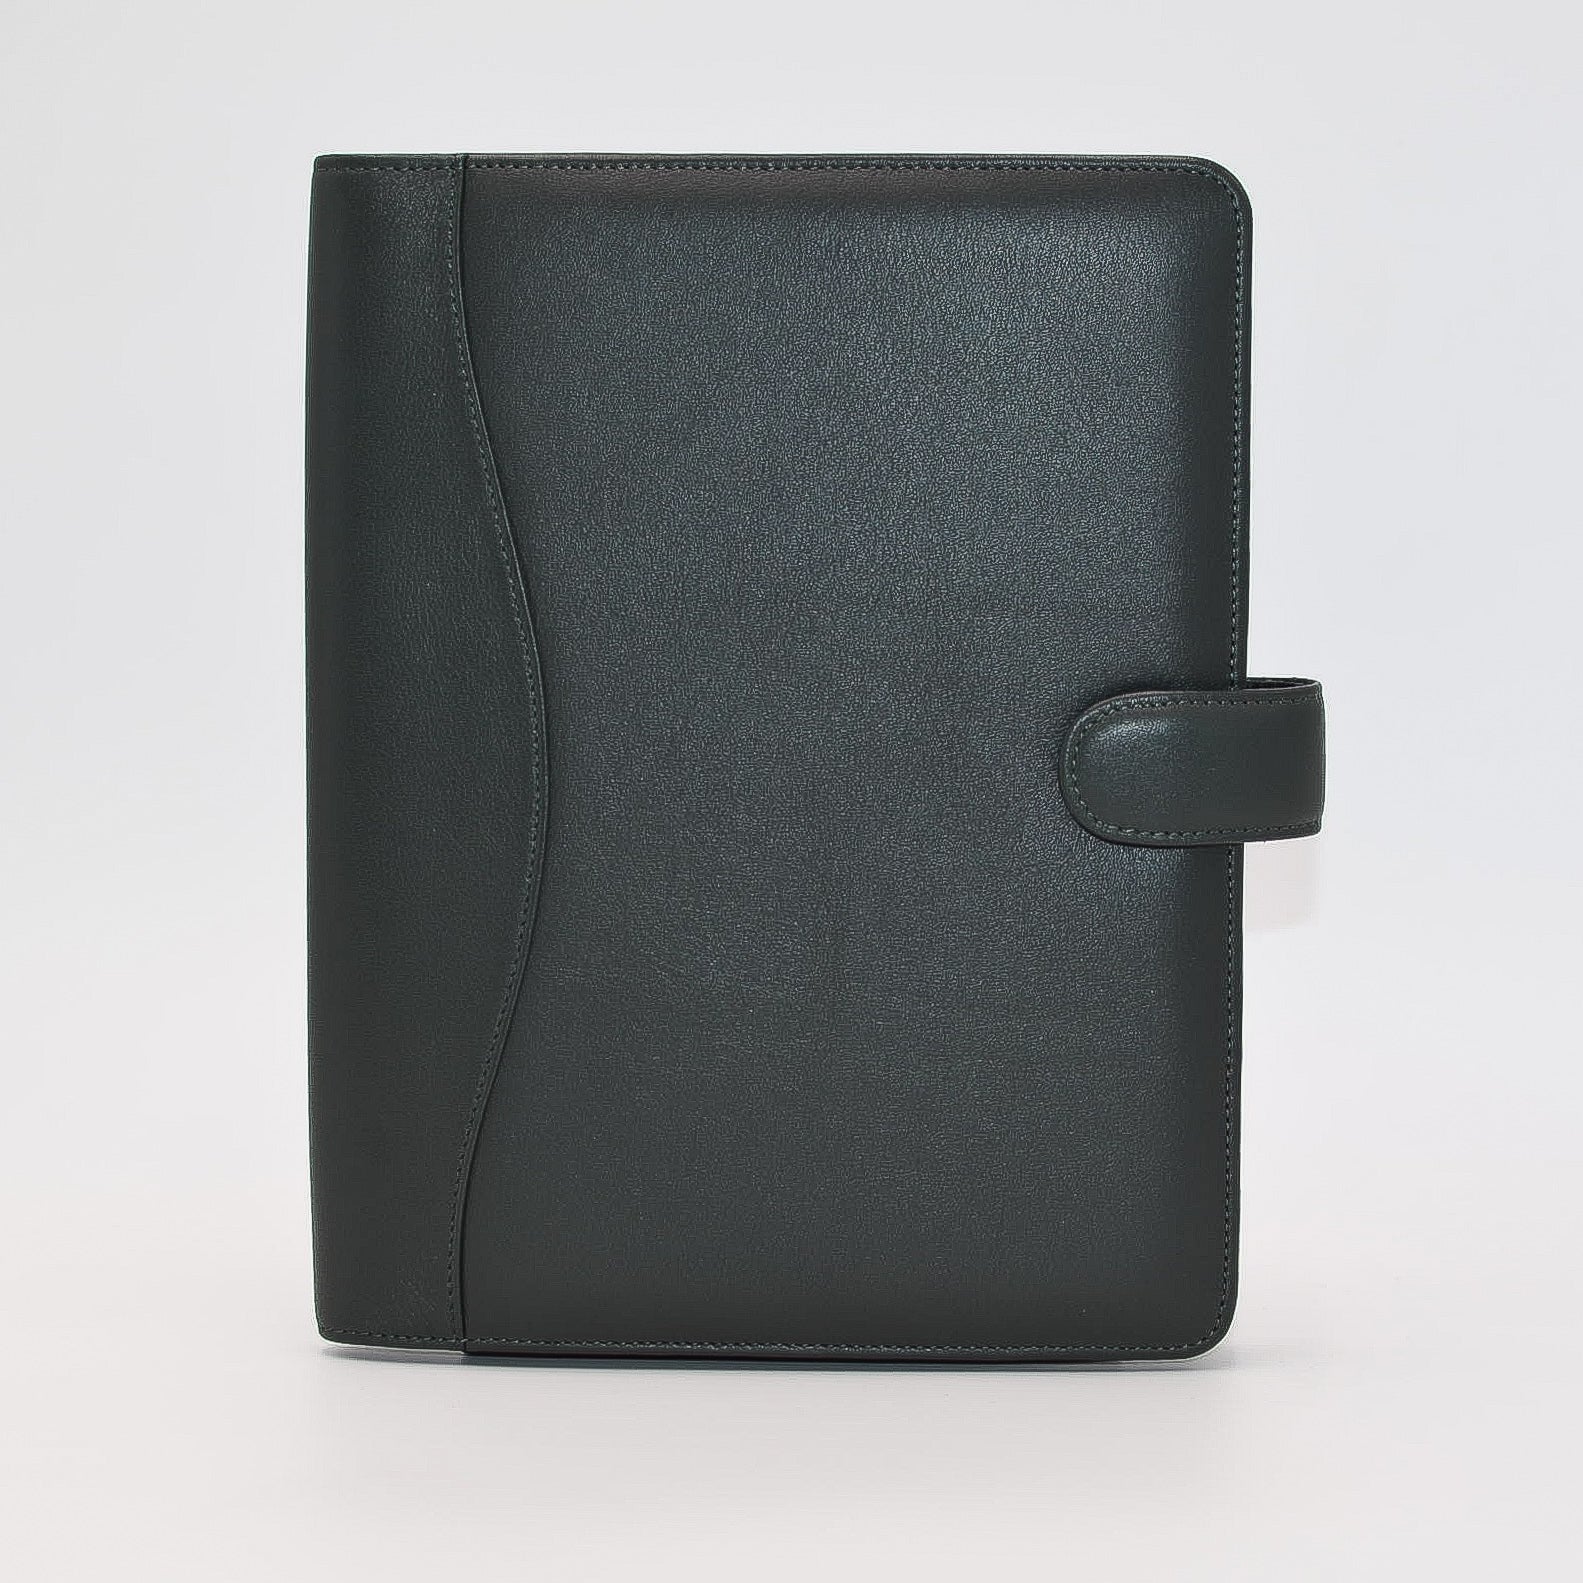 This leather cover is available in British Tan, Red, Burgundy, Green, Black, and Brown. This 7-1/2" x 9-3/4" cover accommodates wire bound and loose leaf inserts with an optional metal 3-ring binder. Keep yourself organized with ease with a snap closure, horizontal note pad holder, clear identification holder, document holder, and leather book mark. 